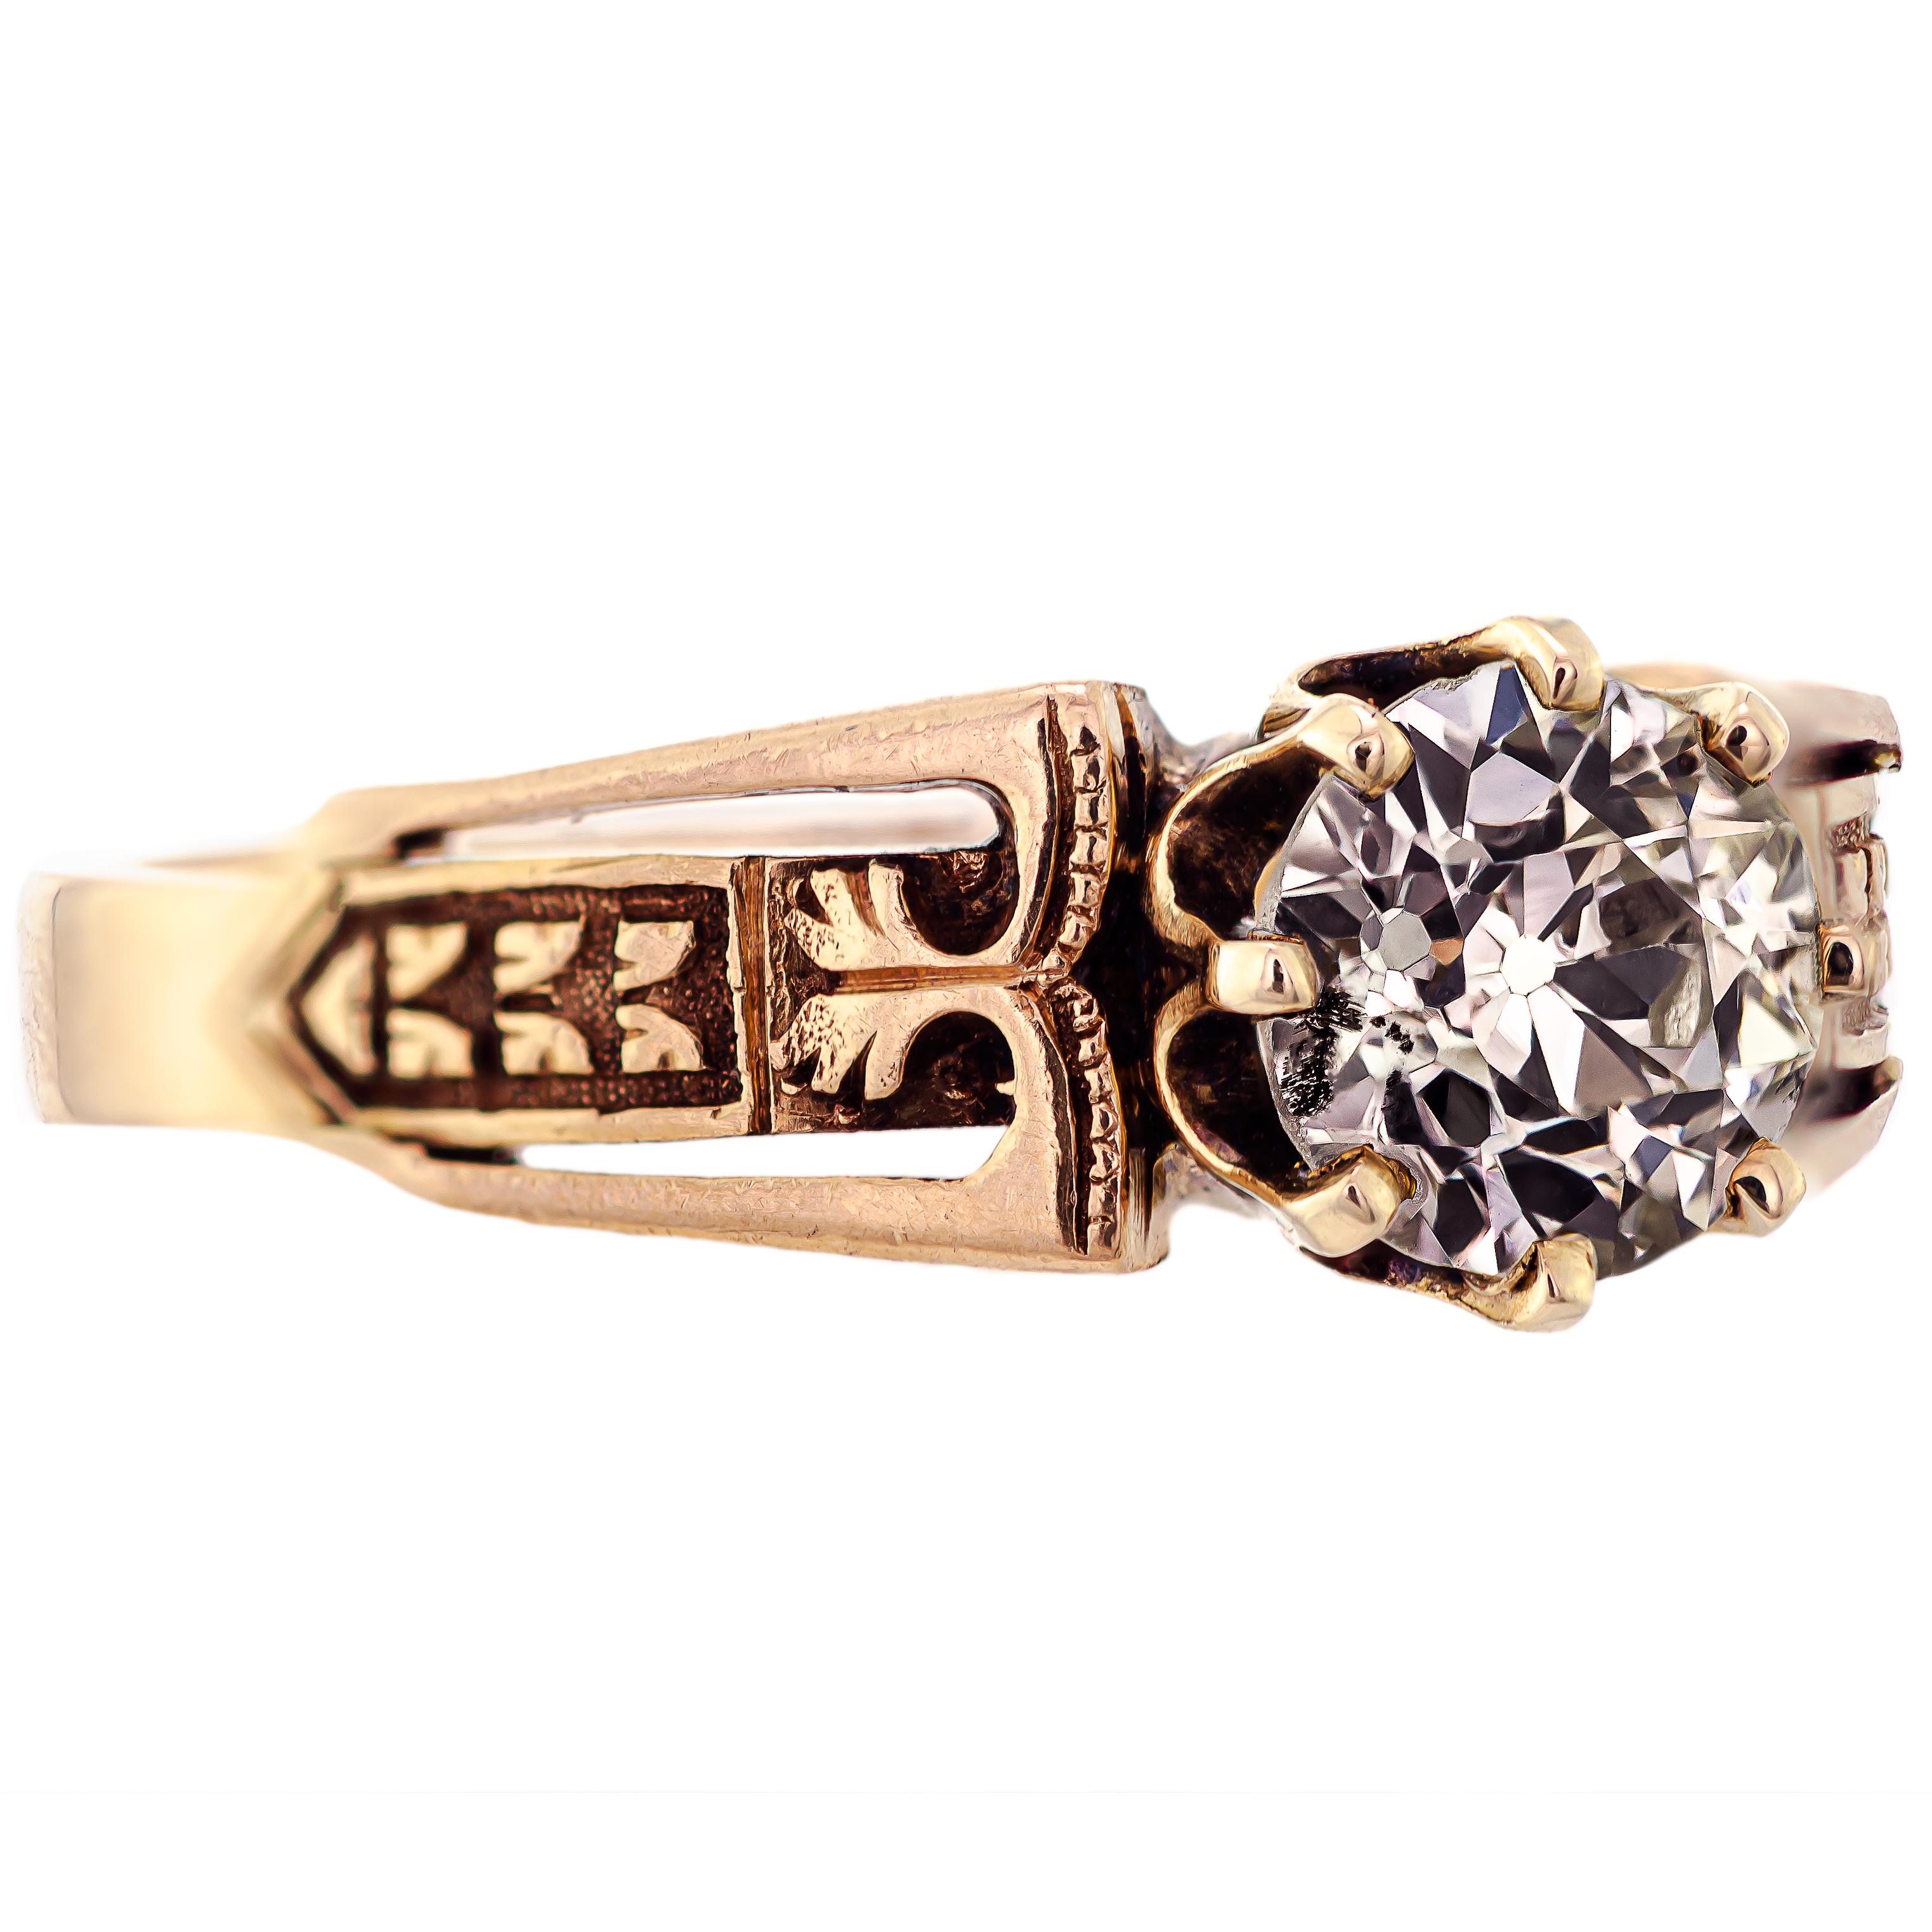 18K Old European Cut Diamond & Yellow Gold Ring In Good Condition For Sale In Wheaton, IL